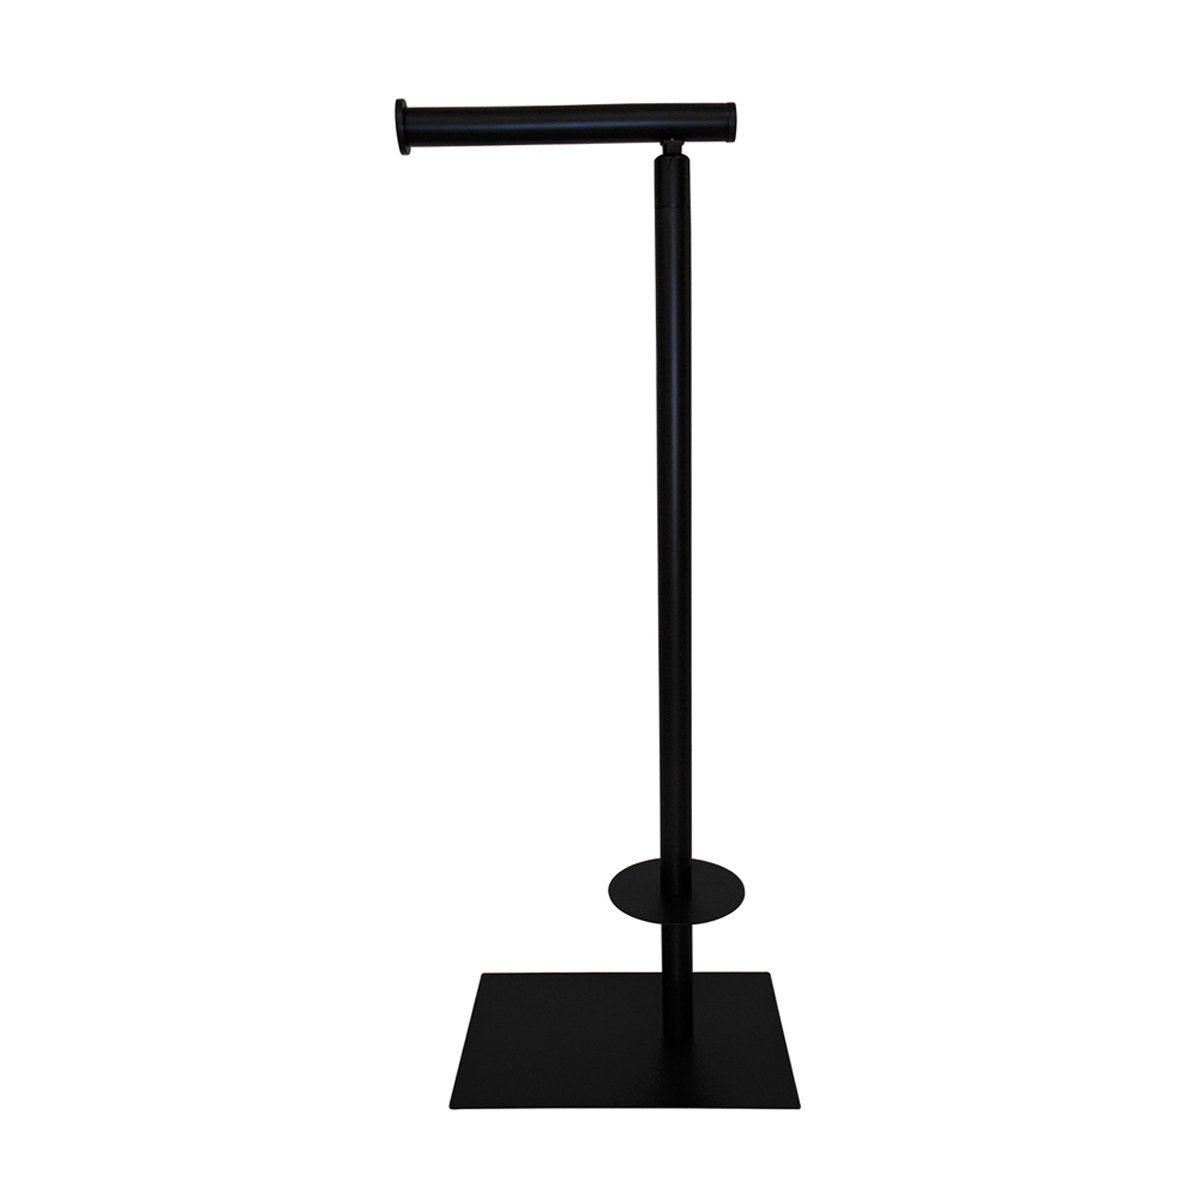 Kingston Brass Claremont Freestanding Toilet Paper Stand-Bathroom Accessories-Free Shipping-Directsinks.